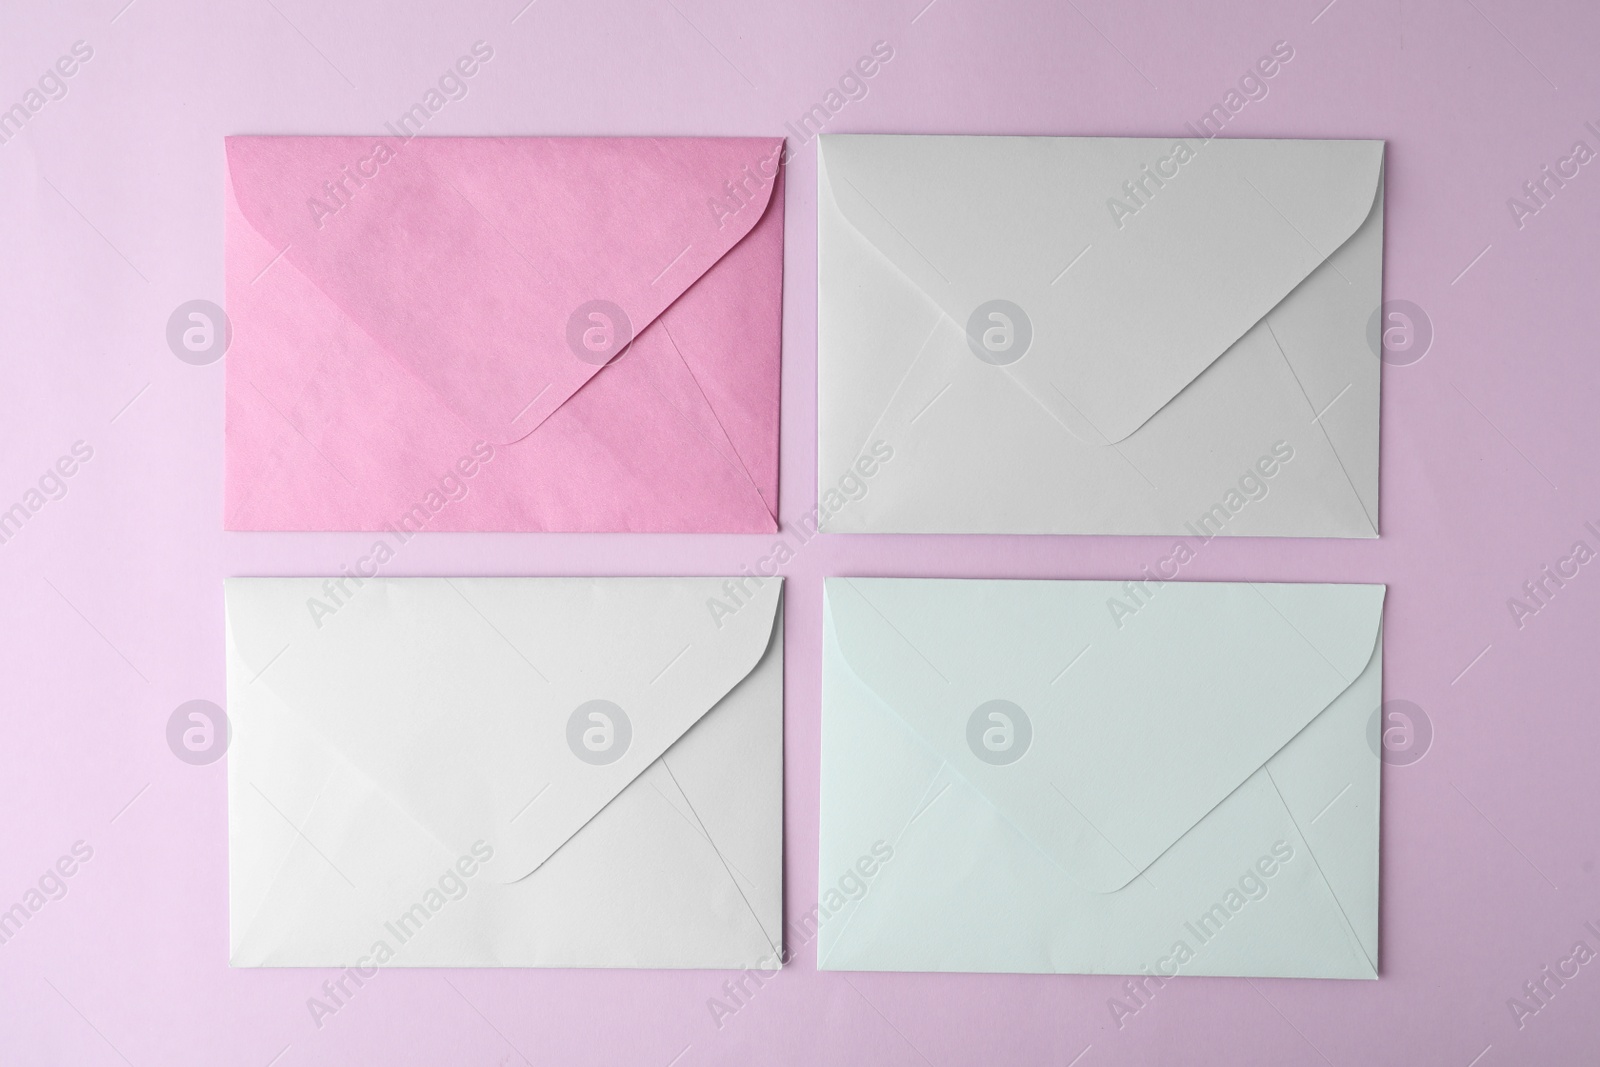 Photo of Colorful paper envelopes on pink background, flat lay